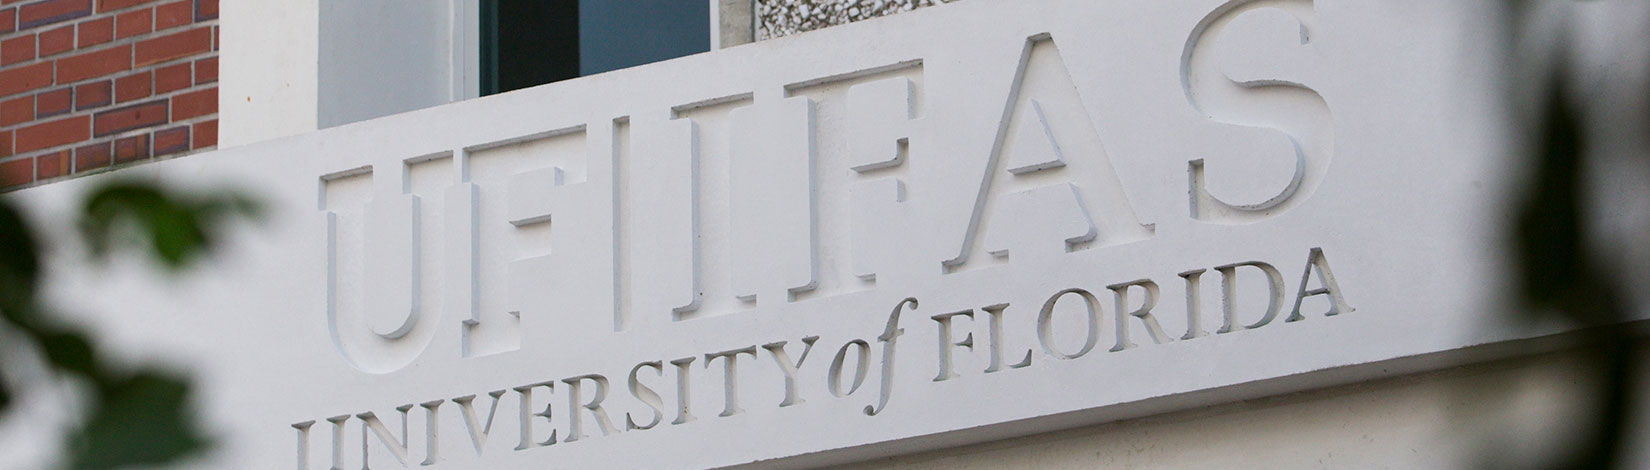 IFAS logo on building 